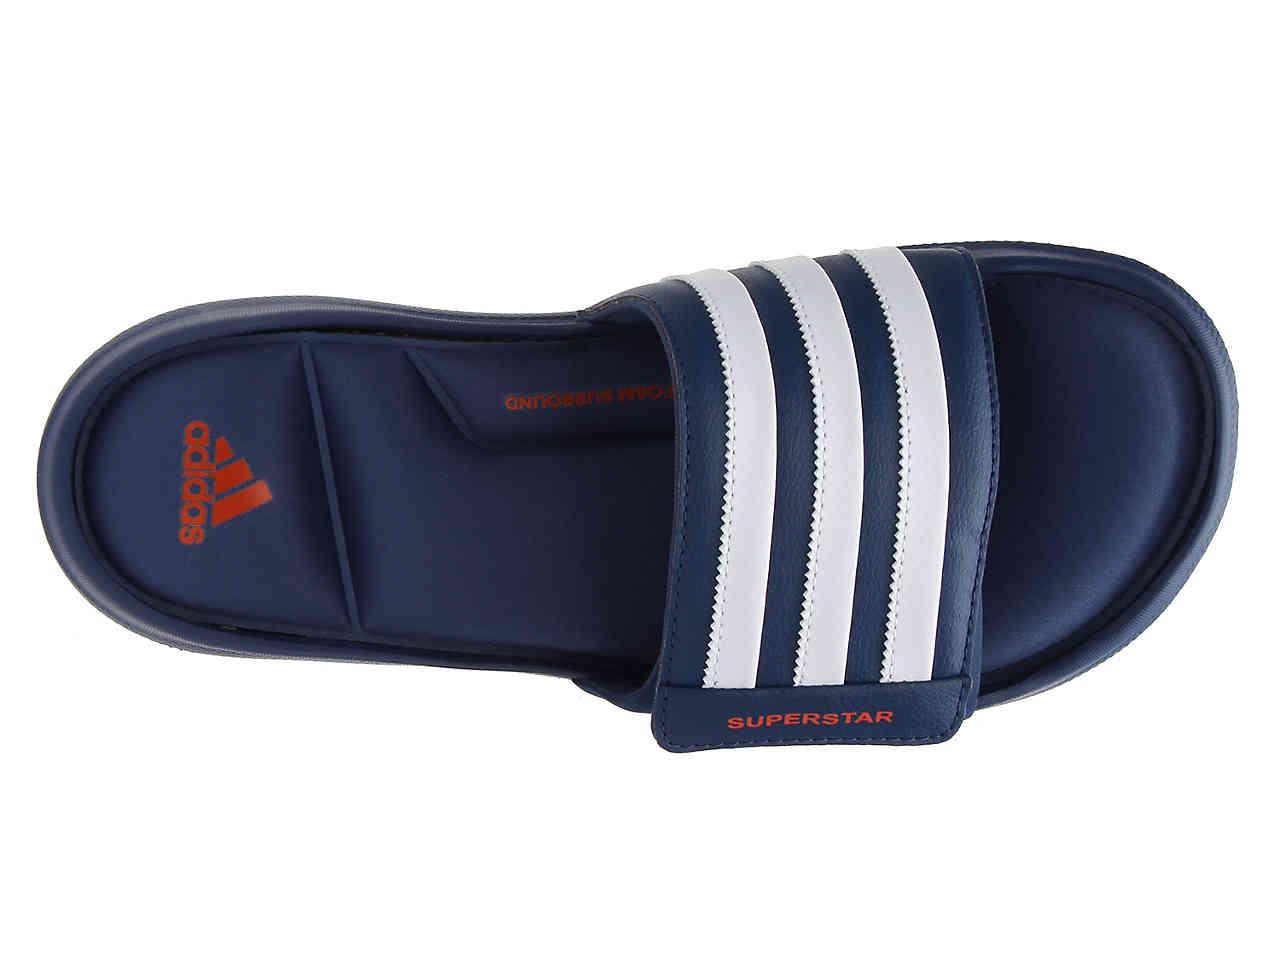 adidas Synthetic Superstar 5g Sandal in (Blue) for Men - Lyst